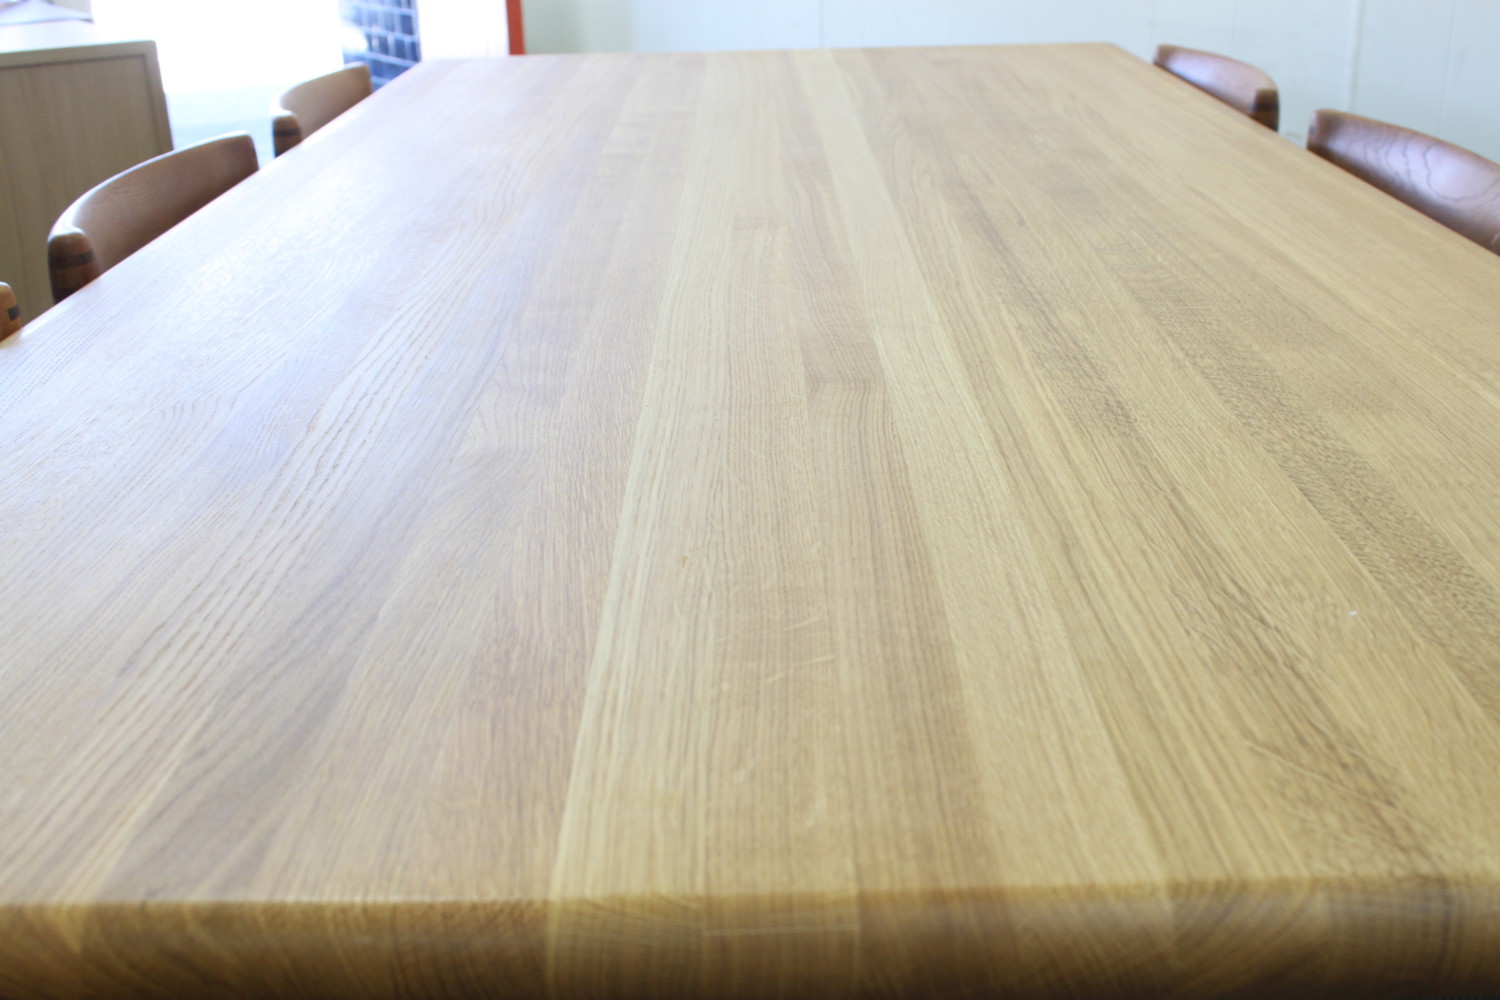 Oak Dining Table by Niels Moller sold